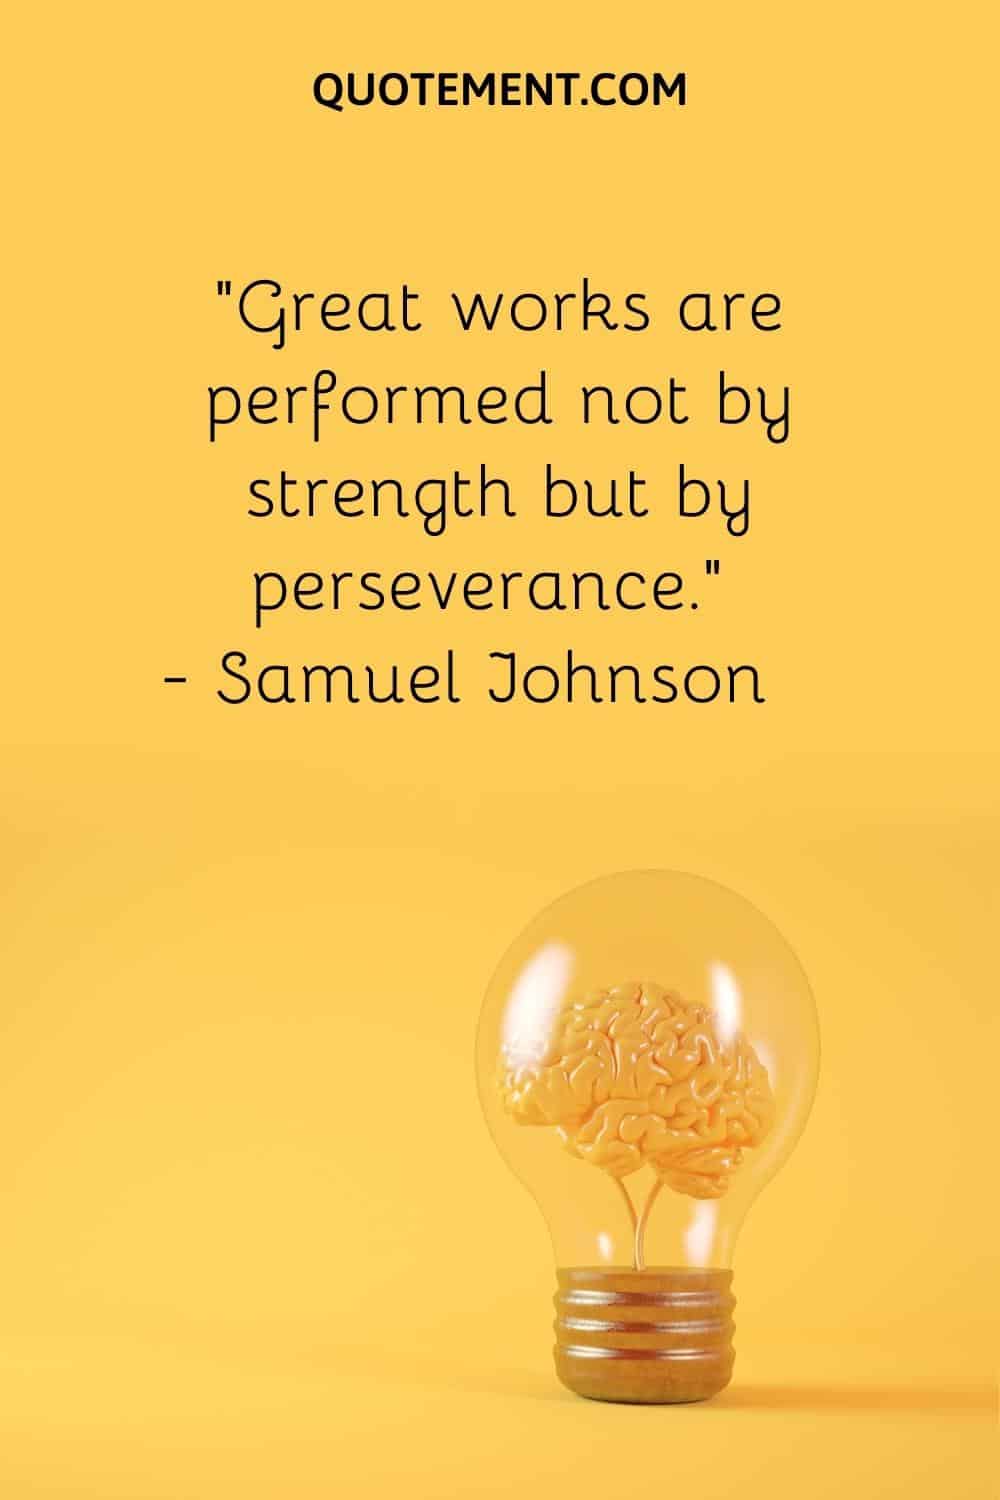 “Great works are performed not by strength but by perseverance.” — Samuel Johnson